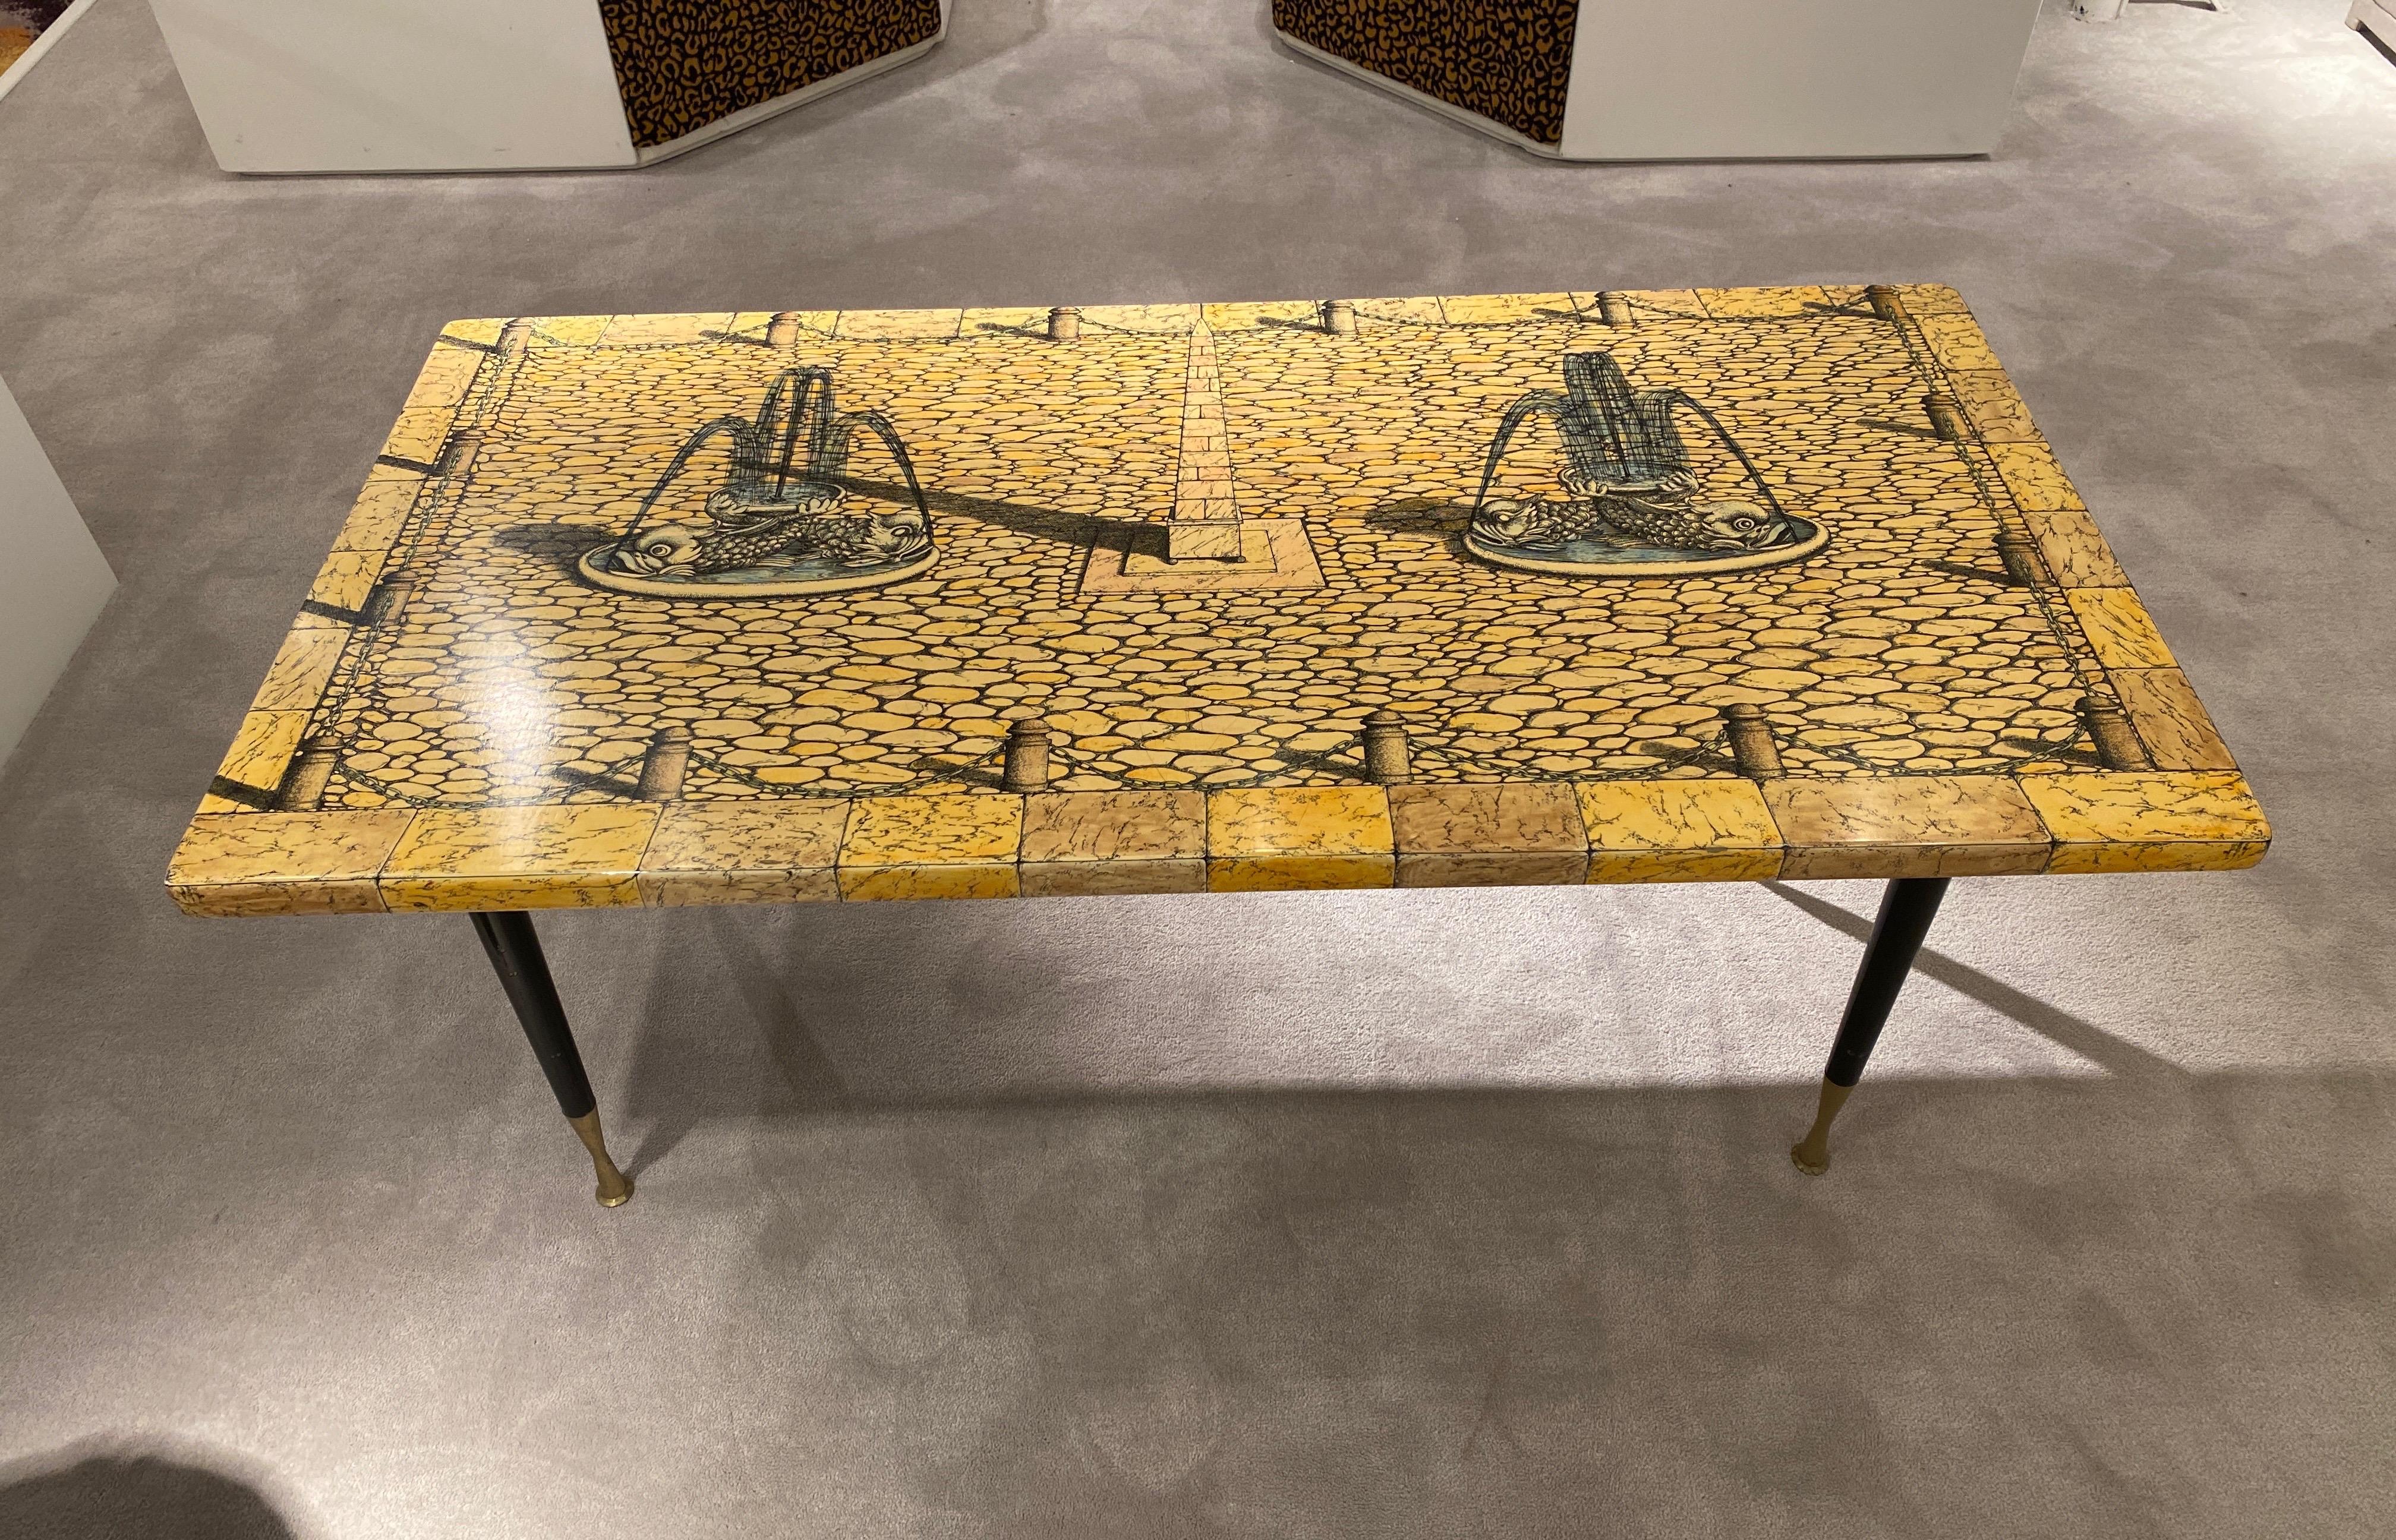 Coffe table by Piero Fornasetti 
Black and white Architectura series
Italy circa 1960
Stamped with original sticker
Black lacquered feet with brass details.
 